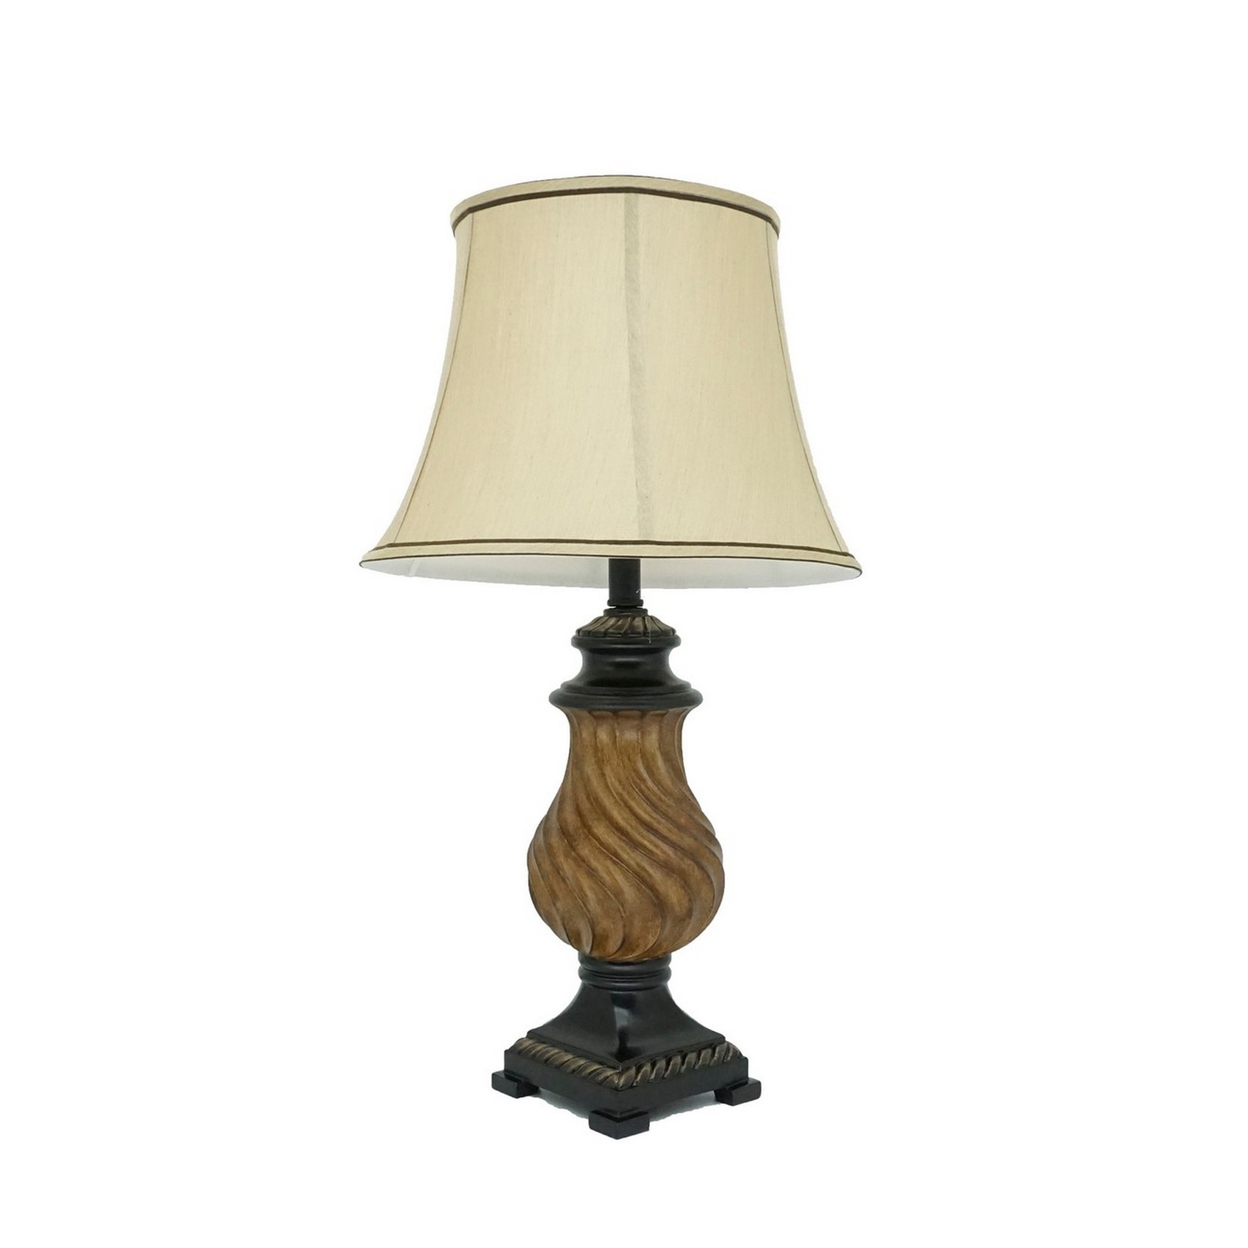 29 Inch Table Lamp, Traditional Round Beige Fabric Shade, Brown Plinth Base- Saltoro Sherpi